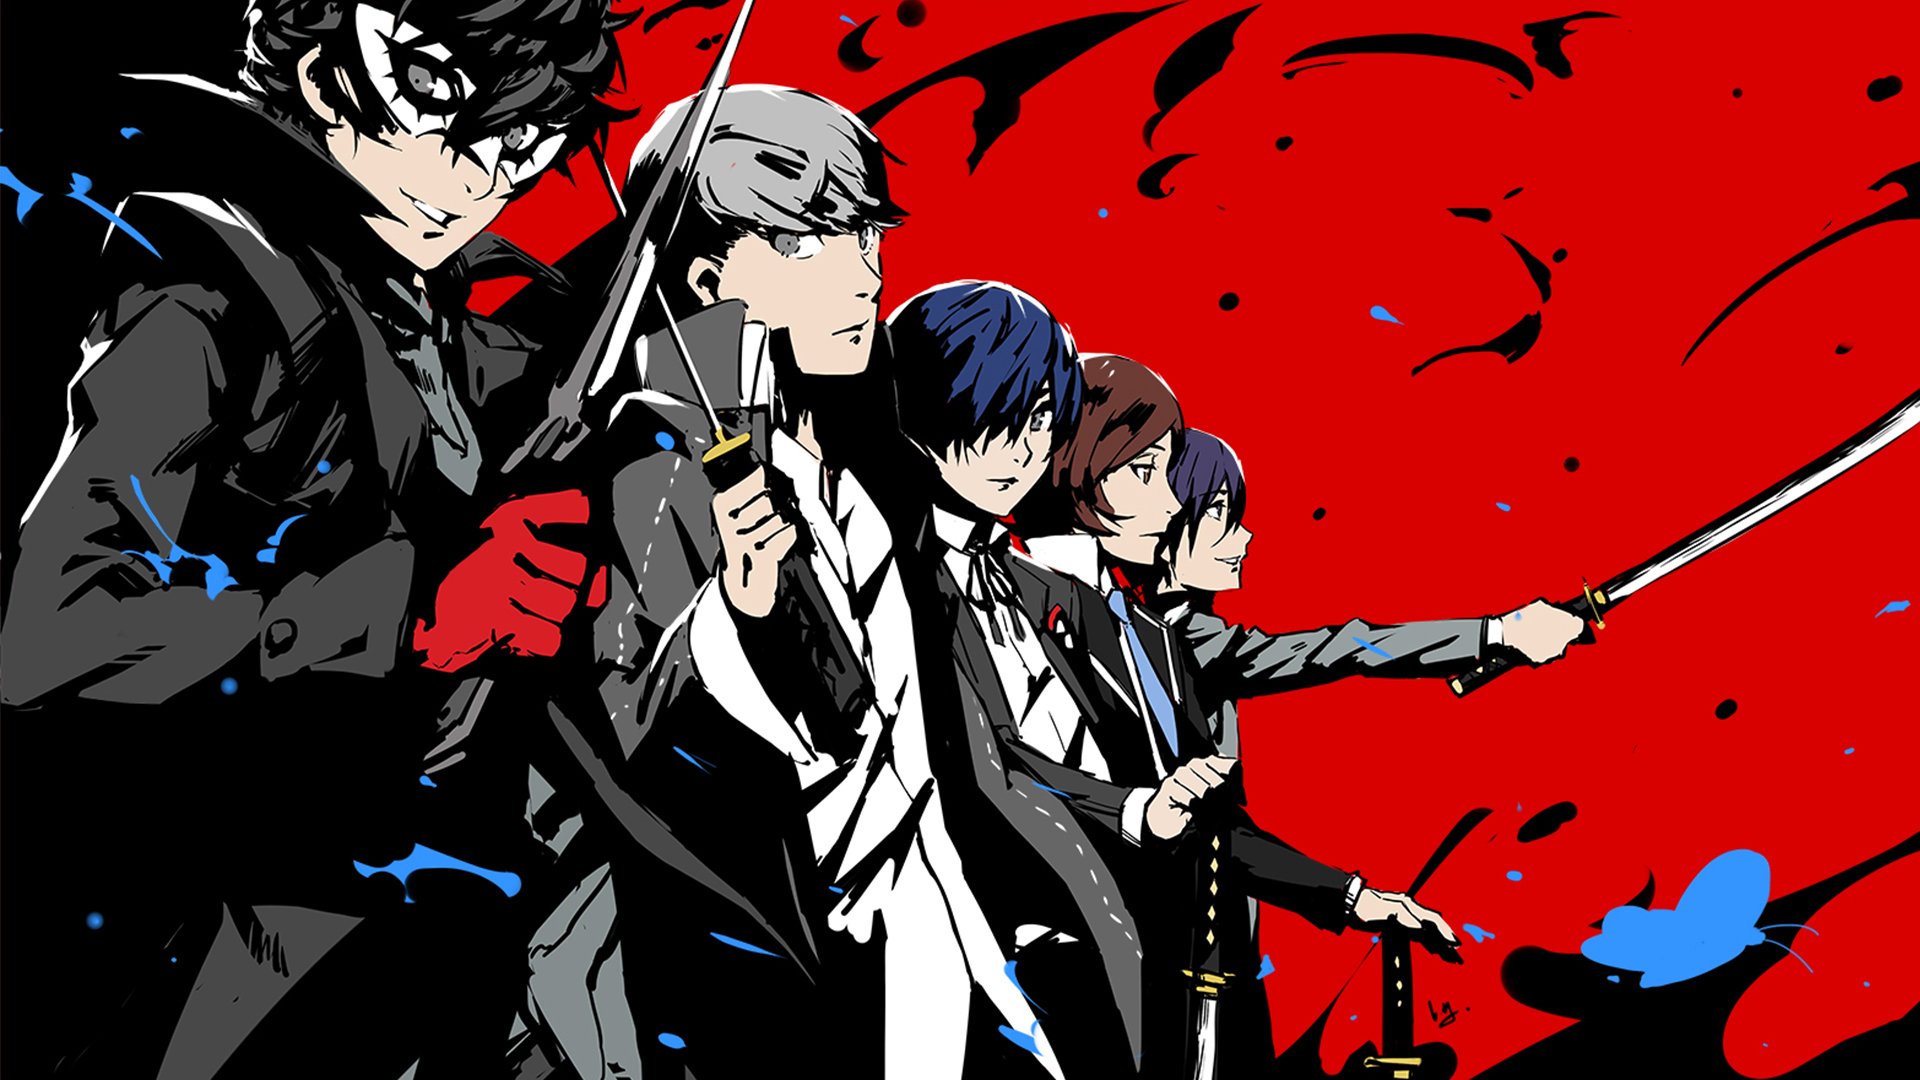 Yu Narukami from Persona 2, Persona 3, and Persona 4, along with Joker from Persona 5, are featured in a vibrant video game wallpaper.